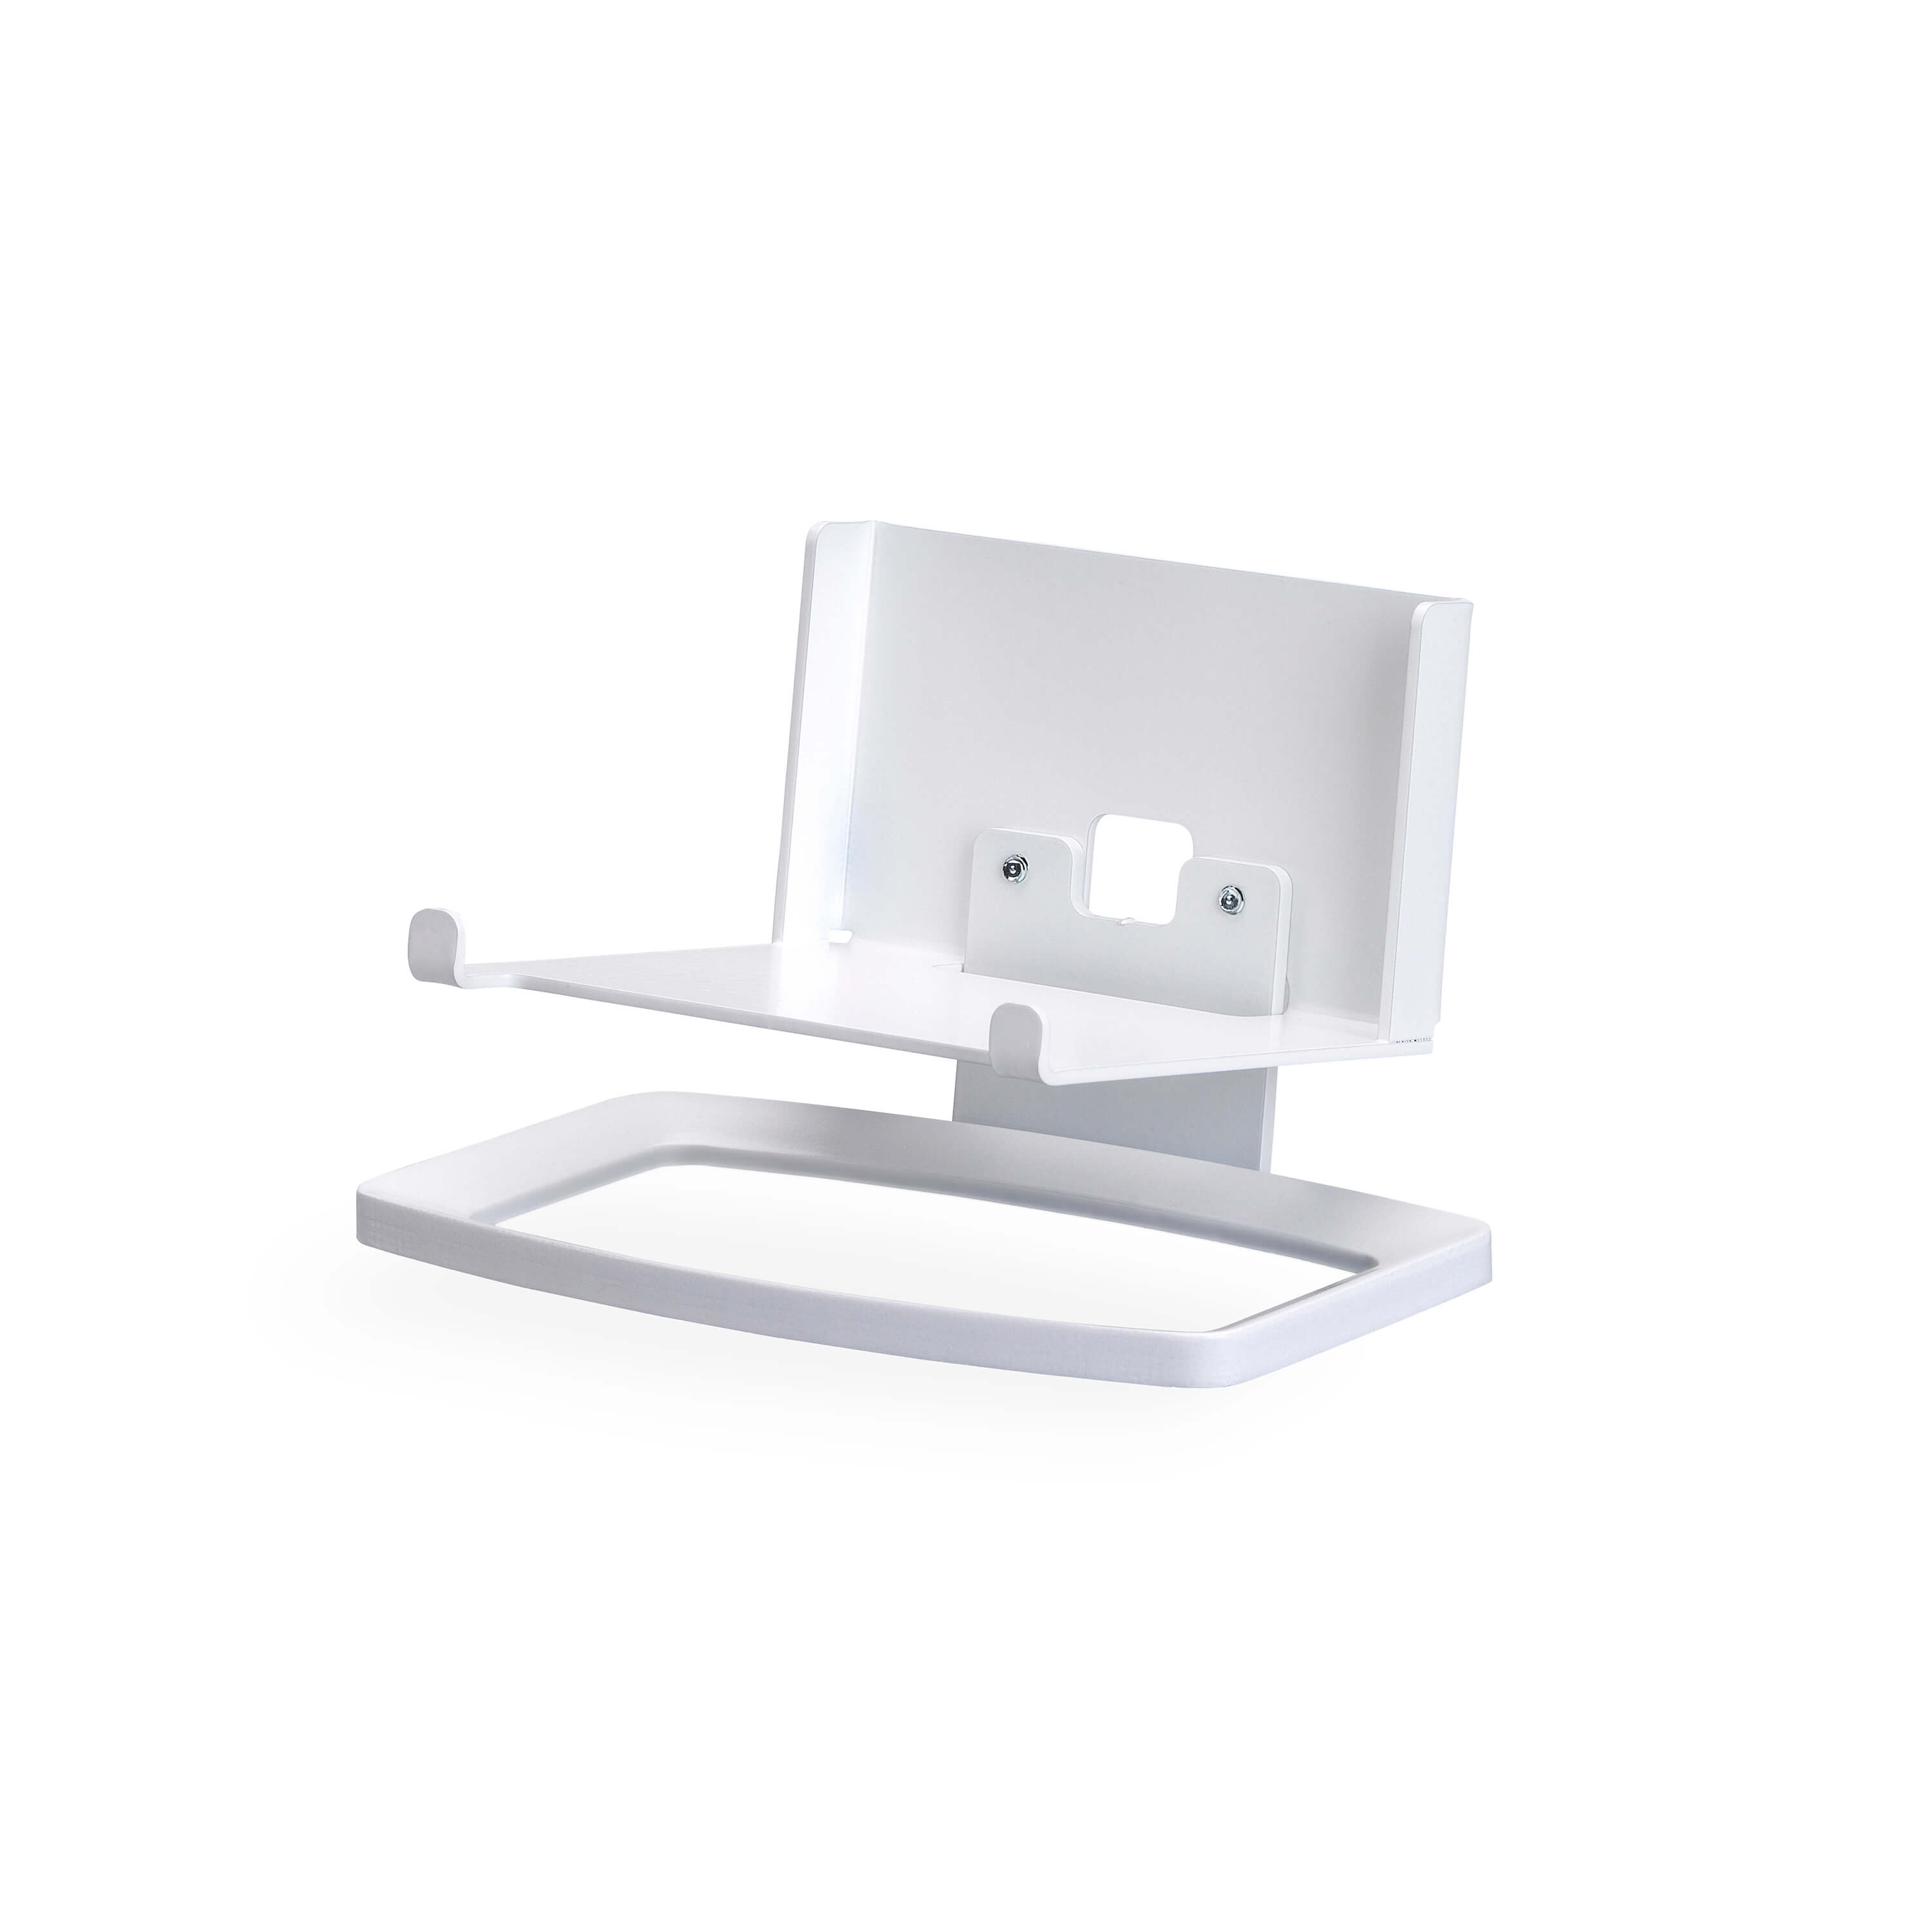 SoundXtra supporto per Bose SoundTouch 30 bianco 